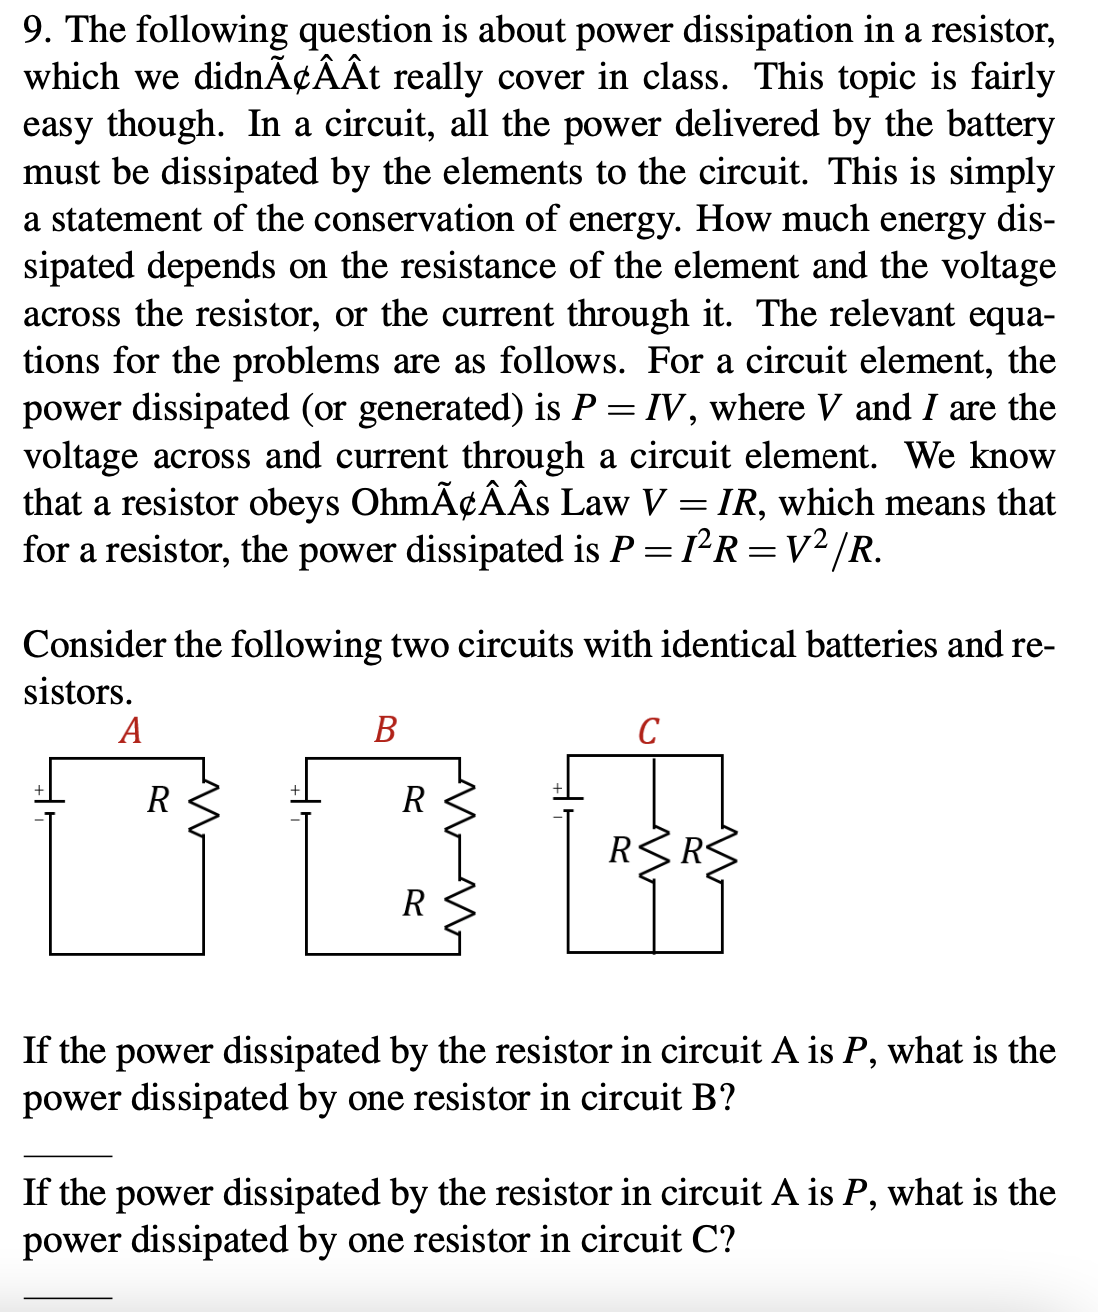 9. The following question is about power dissipation in a resistor,
which we didnÃ¢ÂÂt really cover in class. This topic is fairly
easy though. In a circuit, all the power delivered by the battery
must be dissipated by the elements to the circuit. This is simply
a statement of the conservation of energy. How much energy dis-
sipated depends on the resistance of the element and the voltage
across the resistor, or the current through it. The relevant equa-
tions for the problems are as follows. For a circuit element, the
power dissipated (or generated) is P = IV, where V and I are the
voltage across and current through a circuit element. We know
that a resistor obeys OhmÃ¢ÂÂS Law V = IR, which means that
for a resistor, the power dissipated is P = 1R =V²/R.
Consider the following two circuits with identical batteries and re-
sistors.
А
В
C
R
R
RRS
R
If the power dissipated by the resistor in circuit A is P, what is the
power dissipated by one resistor in circuit B?
If the power dissipated by the resistor in circuit A is P, what is the
power dissipated by one resistor in circuit C?
